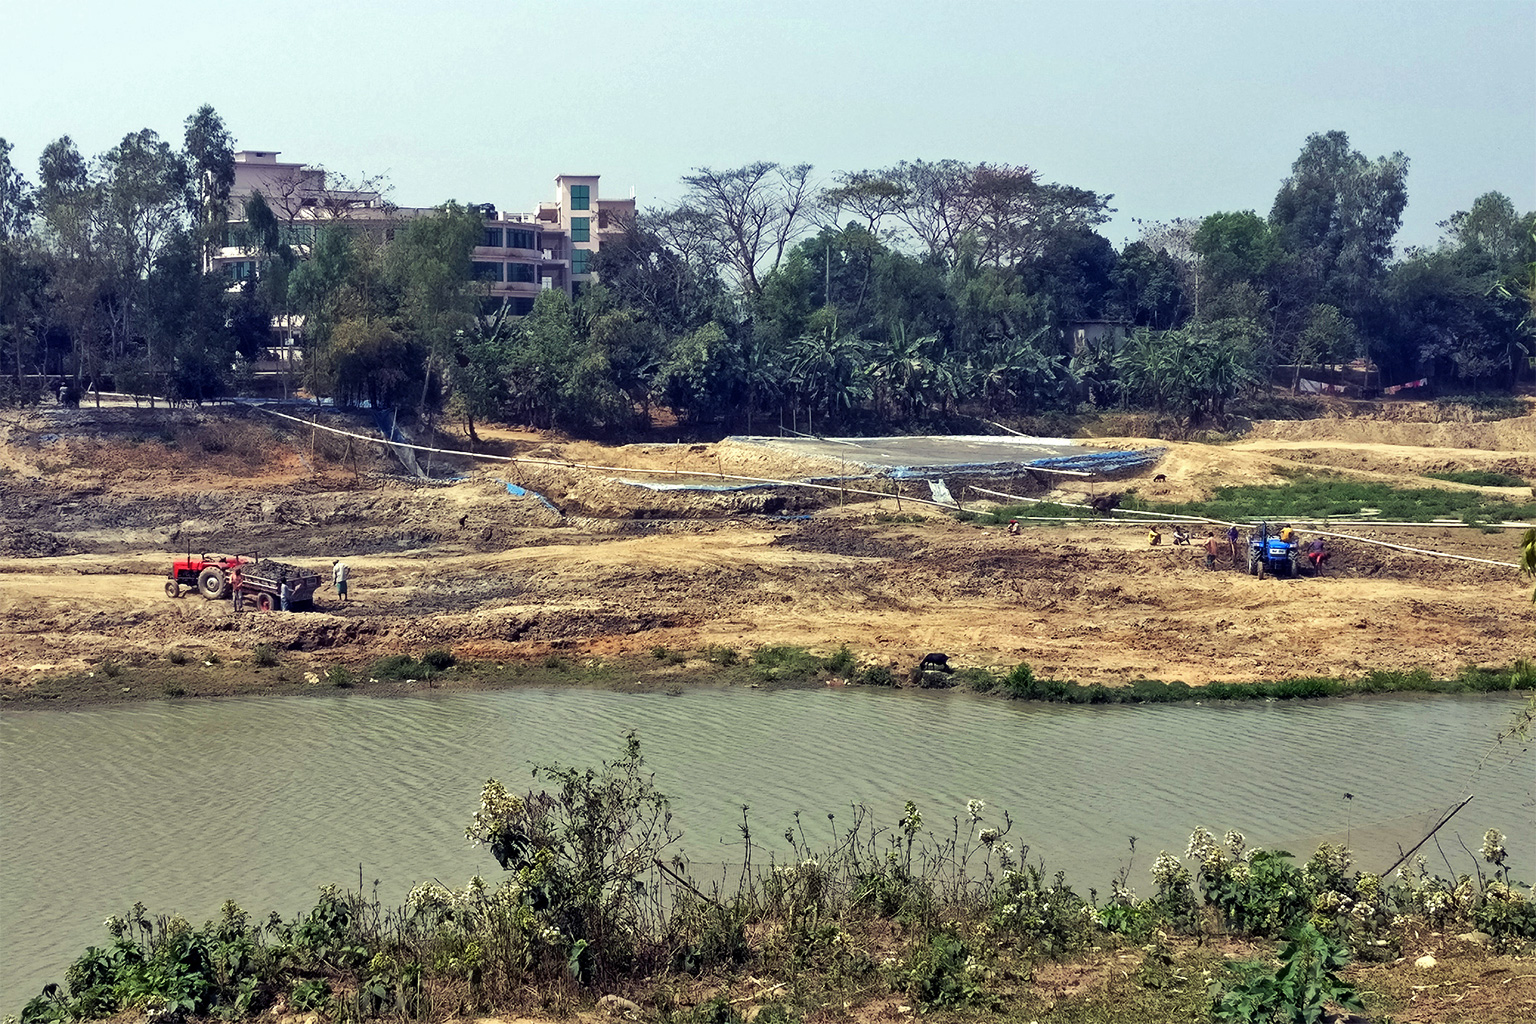 Sand mining on the riverbanks.